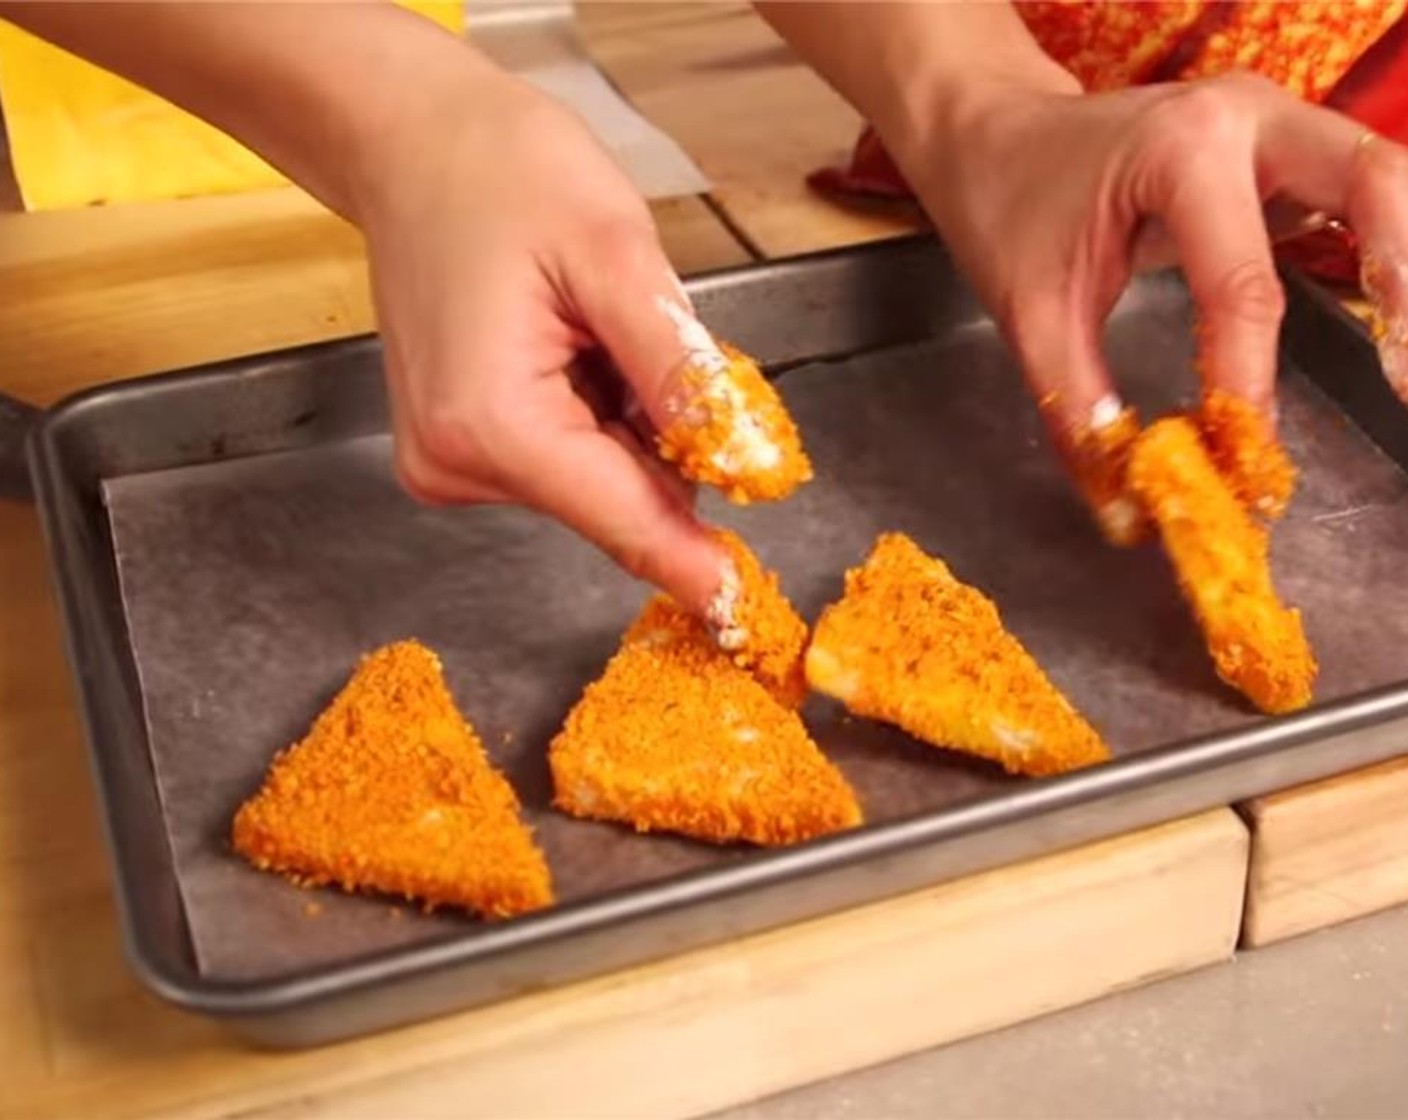 step 5 Take each triangle of cheese, and coat in flour. Quickly dip into the eggs wash, and then coat thoroughly in the Doritos crumbs. Lay onto a cookie sheet. Repeat.  Freeze the Doritos-coated cheese triangles for at least 3 hours before frying.